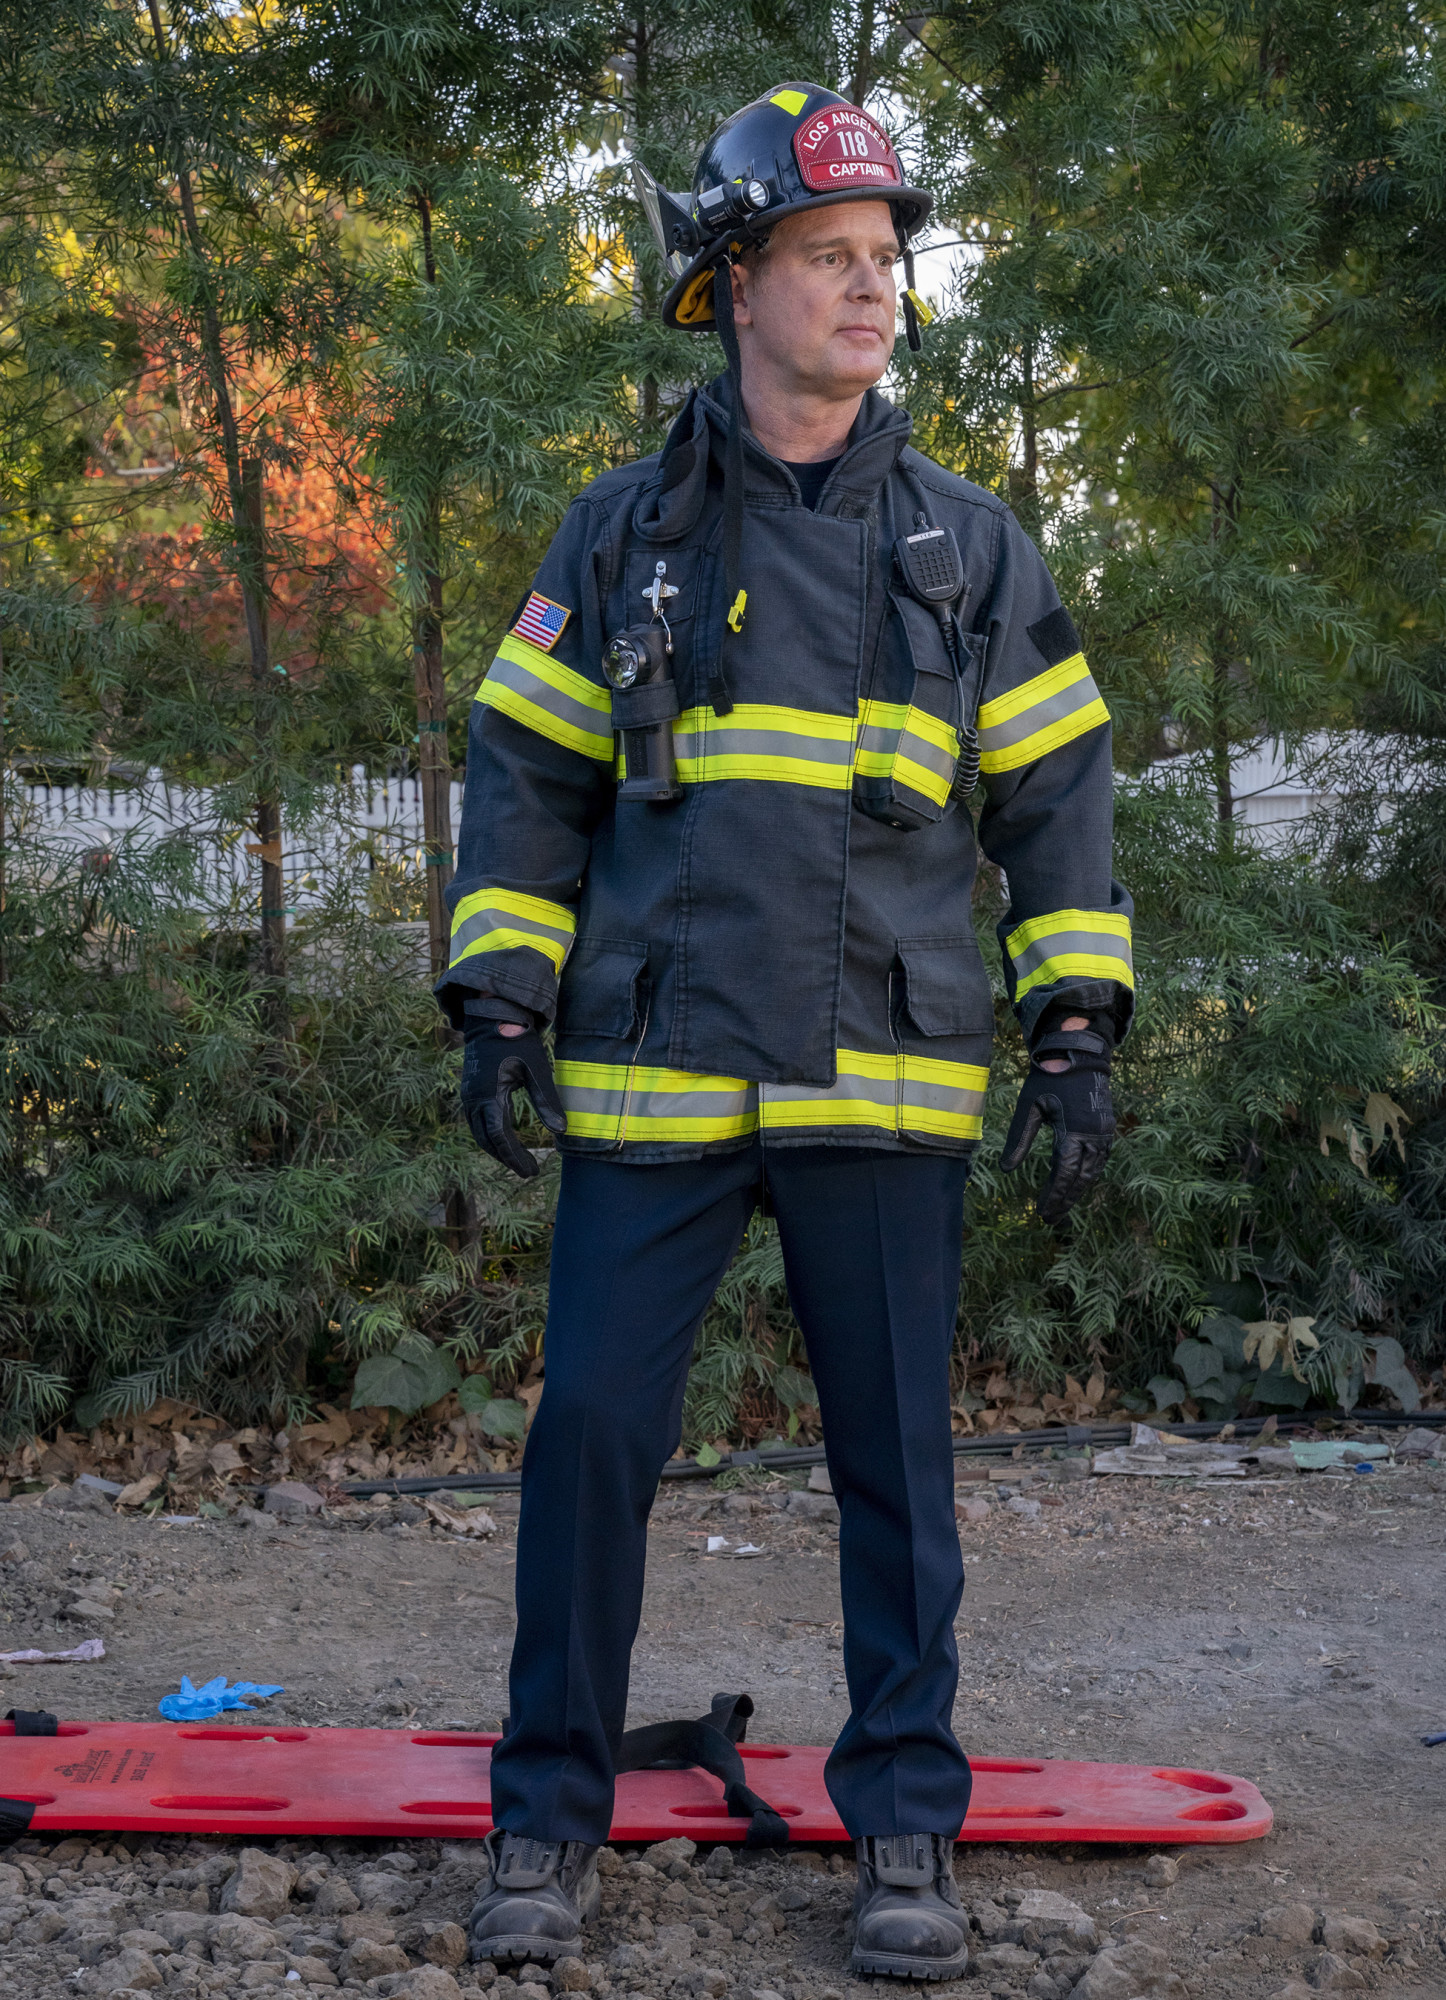 9-1-1: L-R: Peter Krause in the “Seize The Day” spring premiere episode of 9-1-1 airing Sunday, March 16 (8:00-9:00 PM ET/PT) on FOX. CR: Jack Zeman / FOX. © 2020 FOX MEDIA LLC.